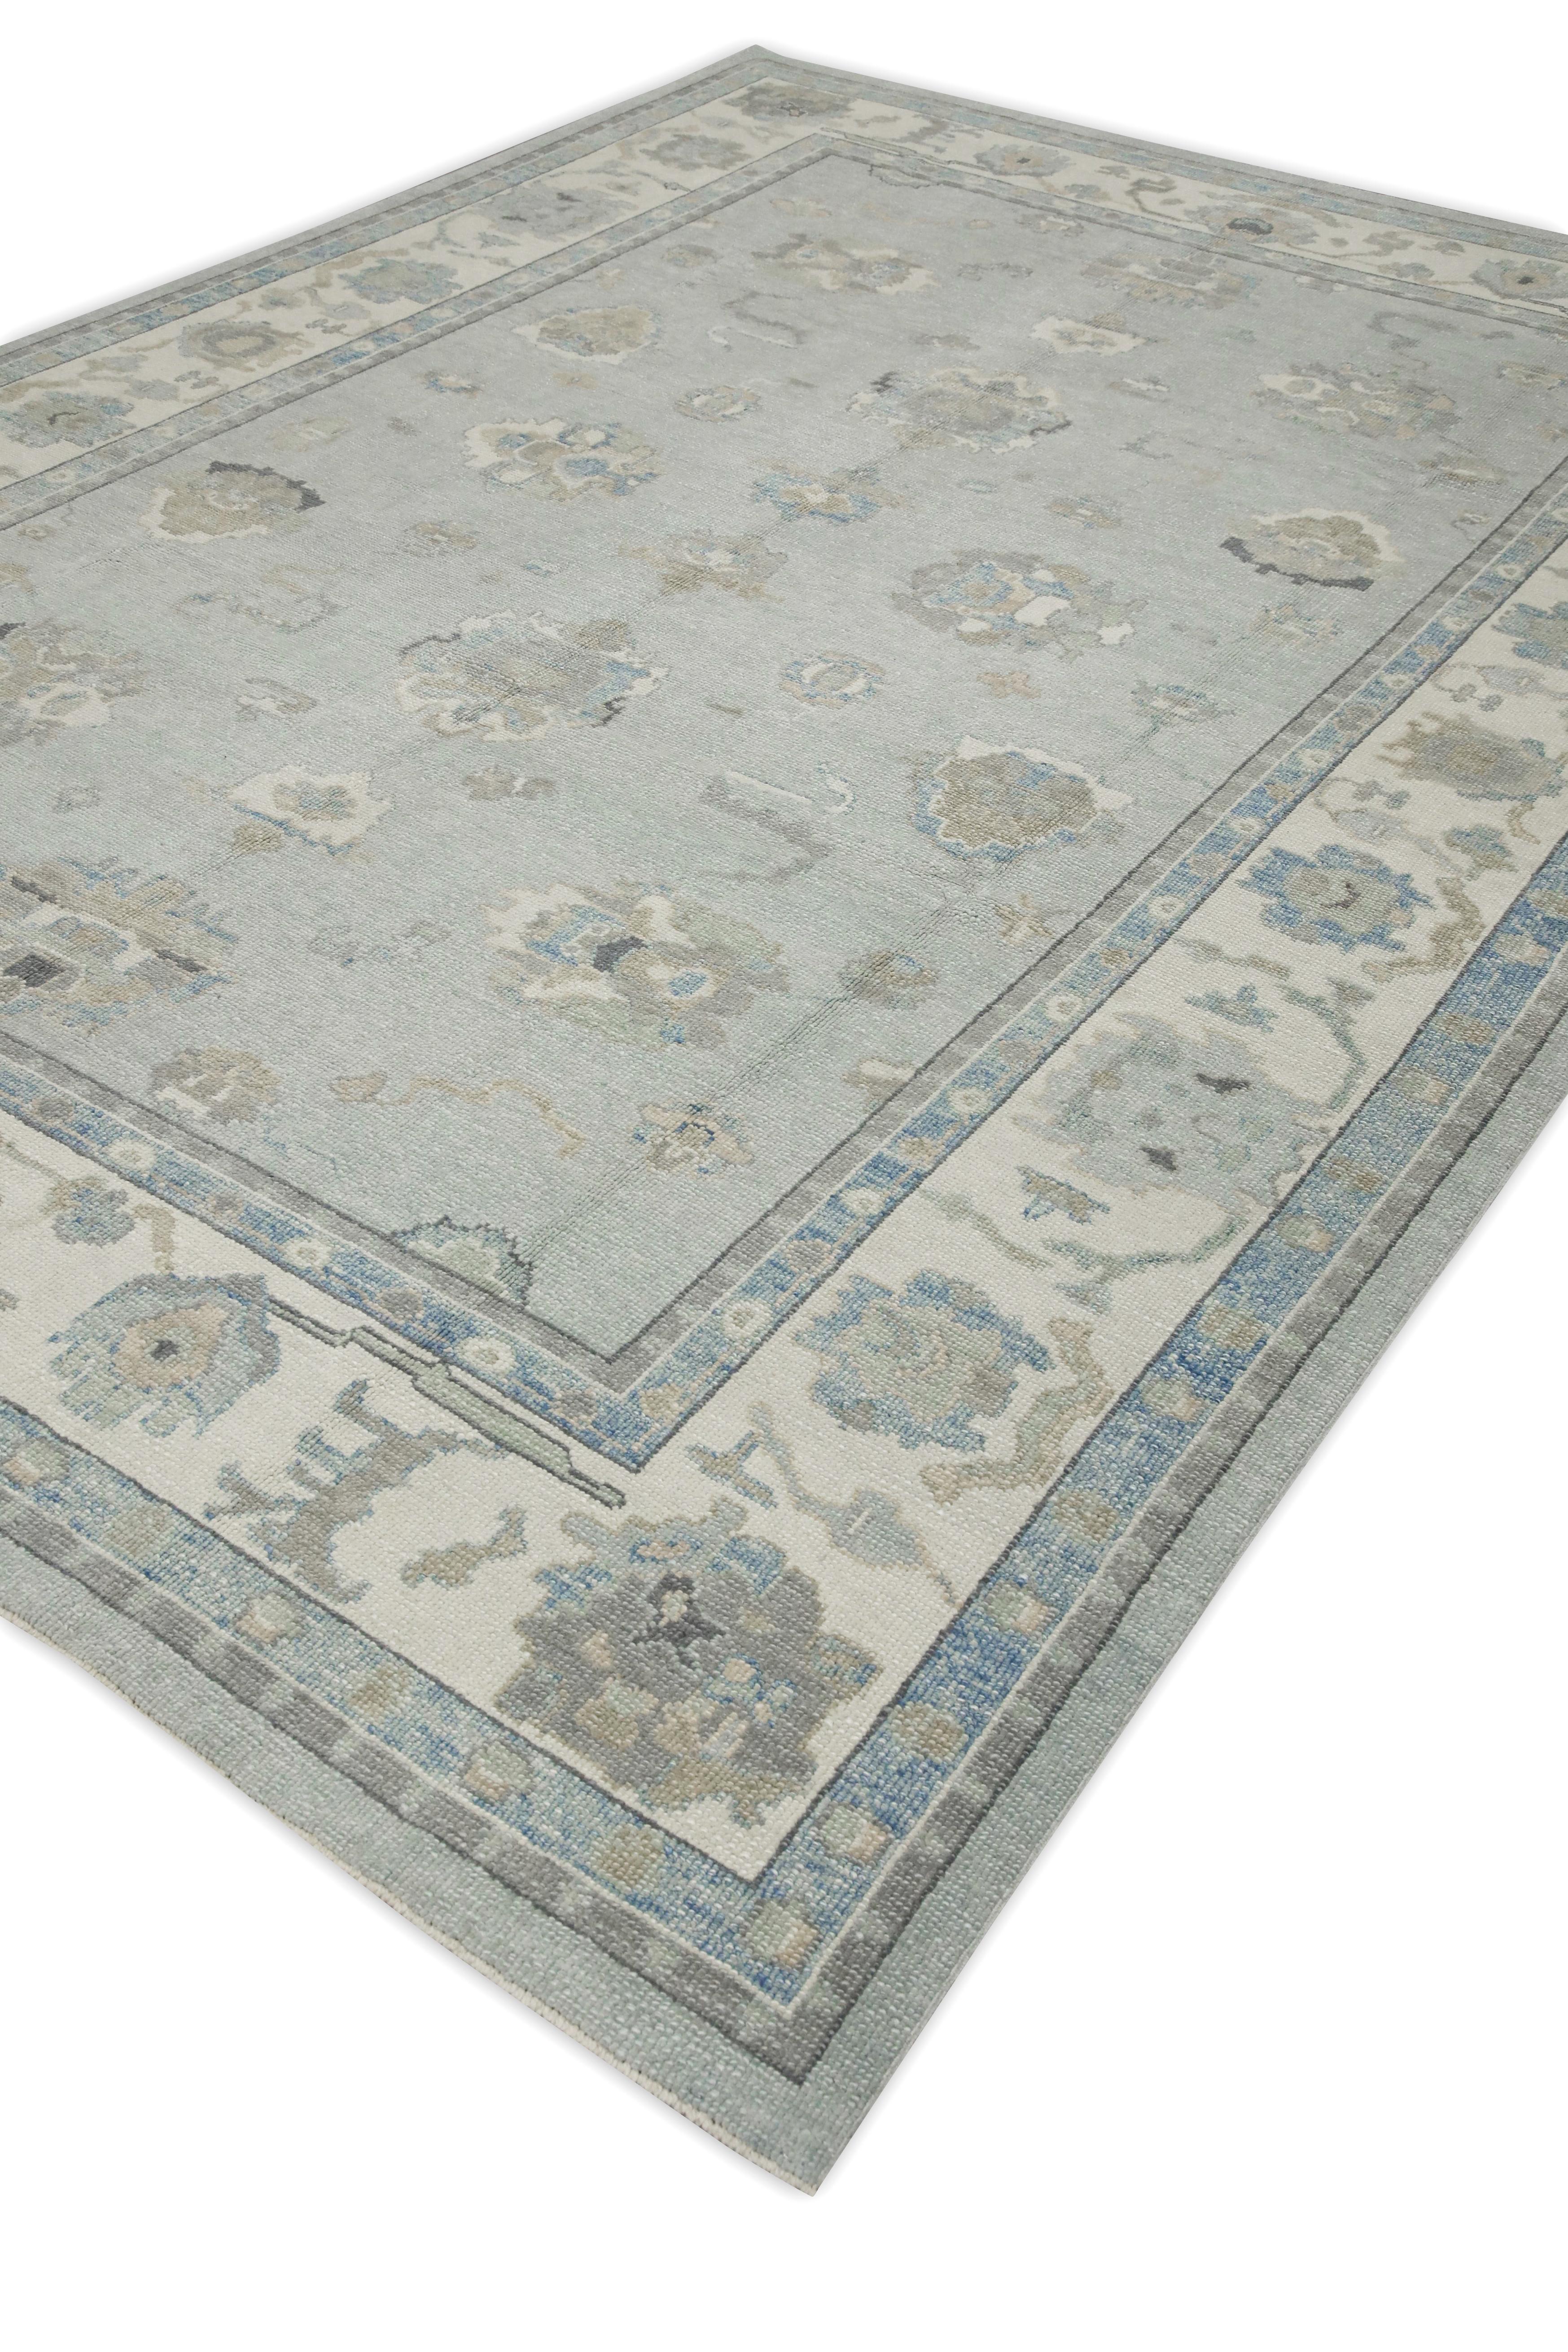 Contemporary Blue Floral Design Handwoven Wool Turkish Oushak Rug 8'8